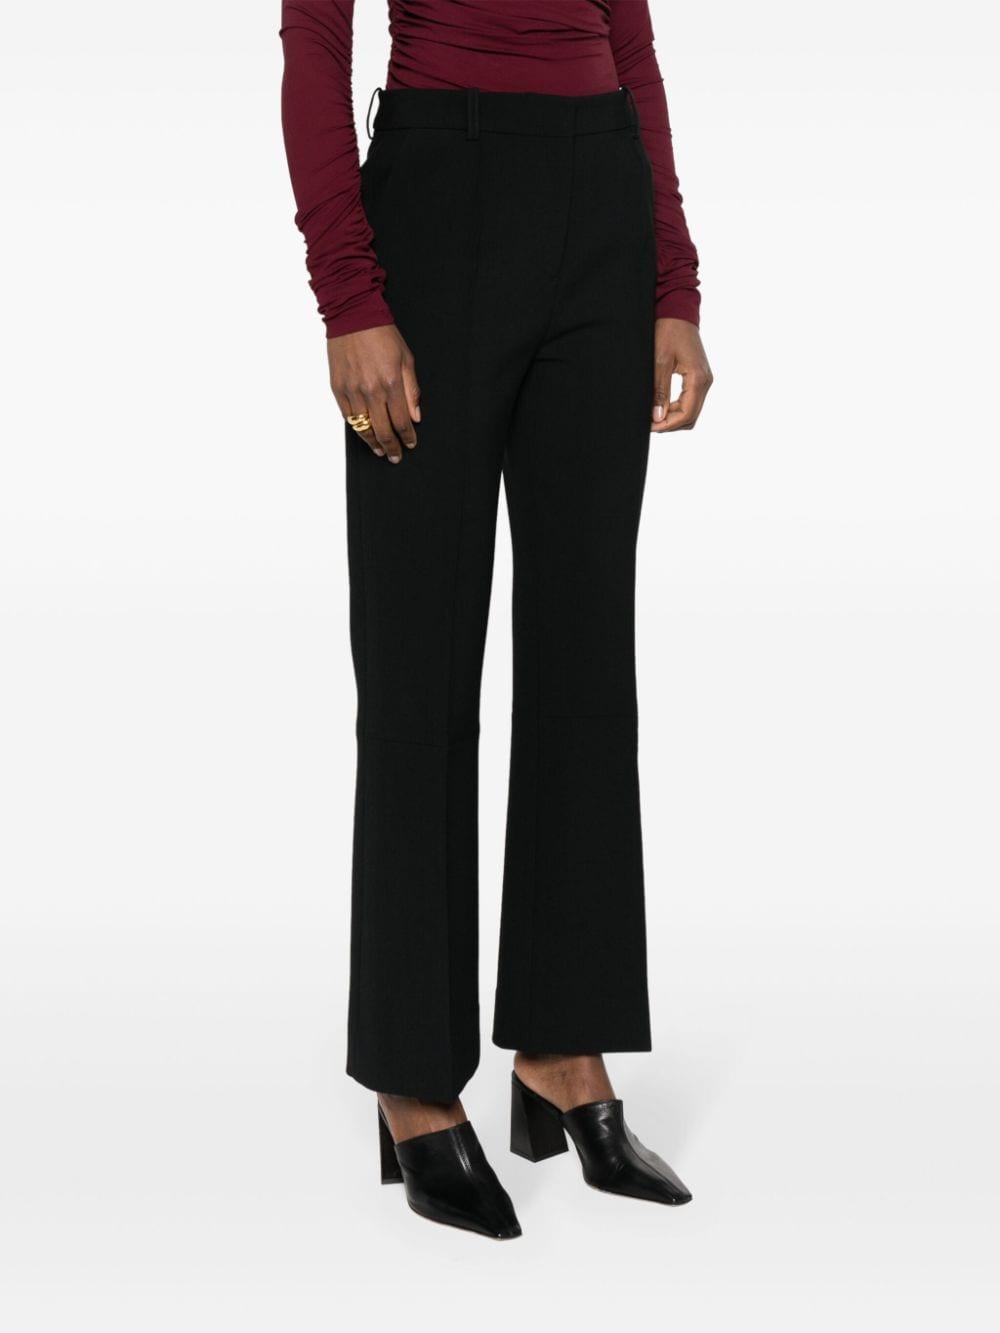 Brown Body Split Front Leggings by Victoria Beckham on Sale